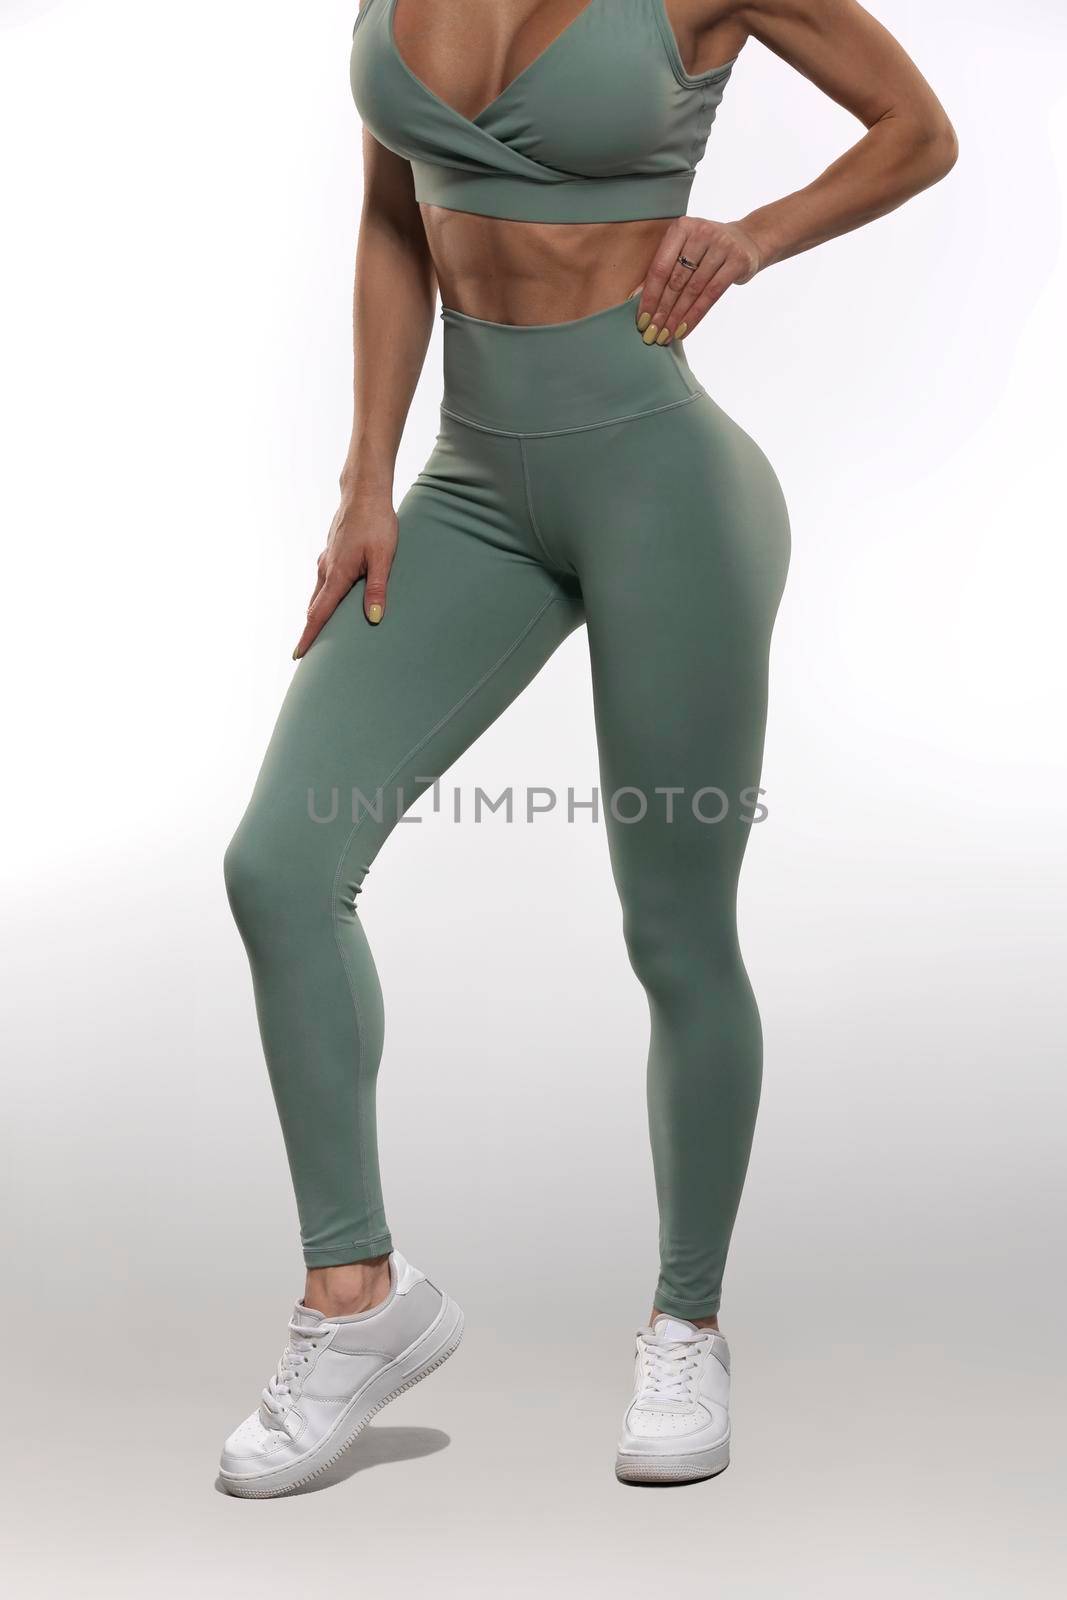 legs brunette girl in olive leggings and top on a white background